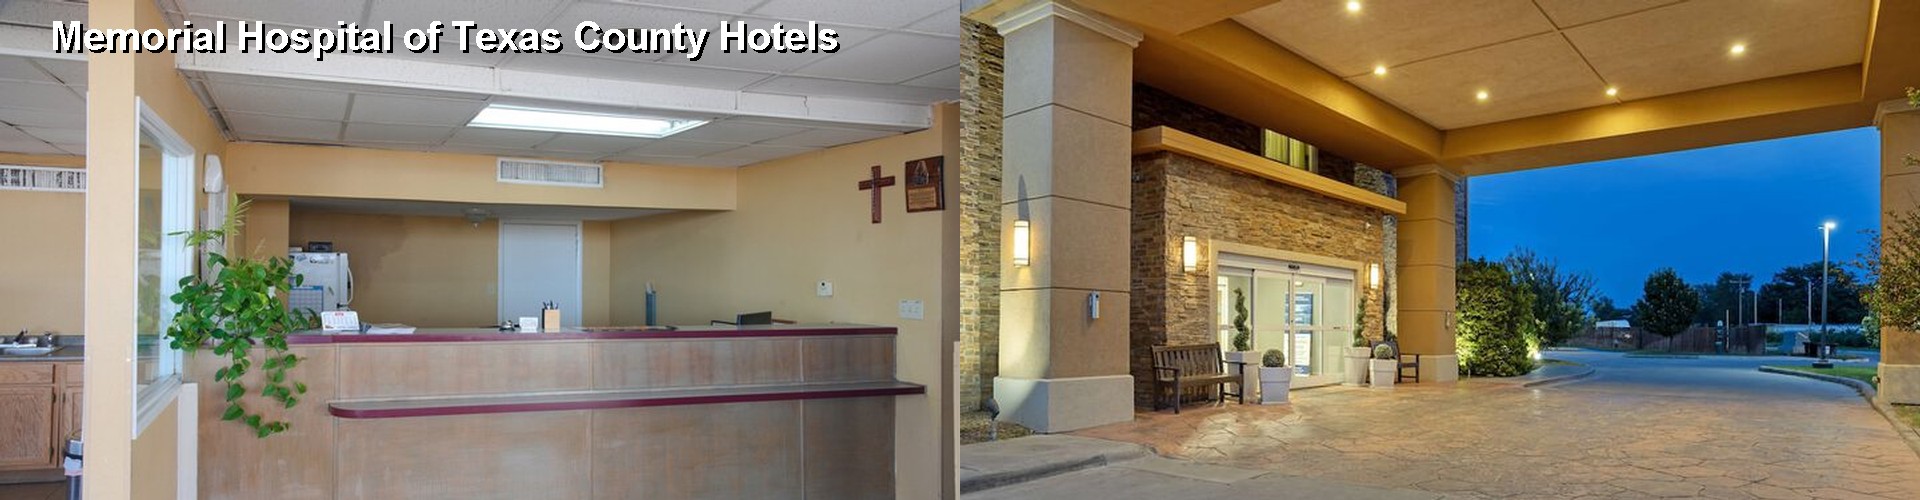 4 Best Hotels near Memorial Hospital of Texas County